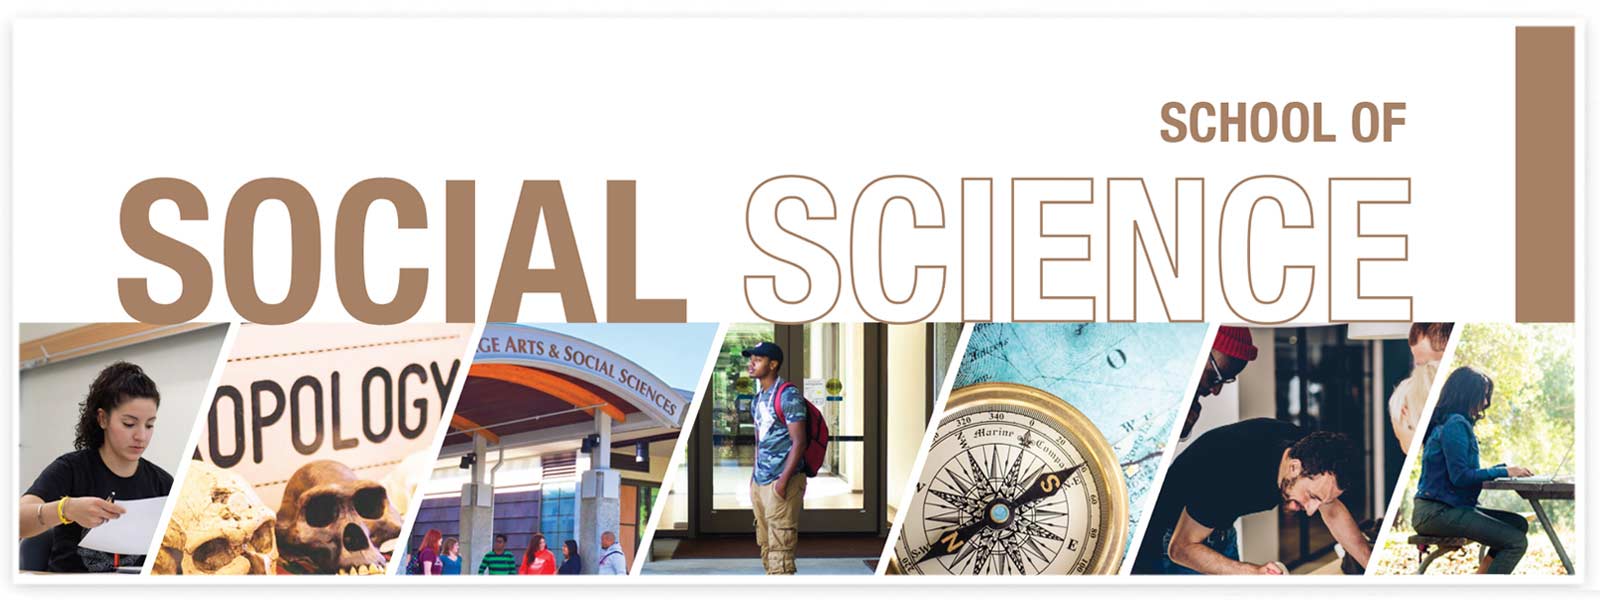 Collage of Social Science programs